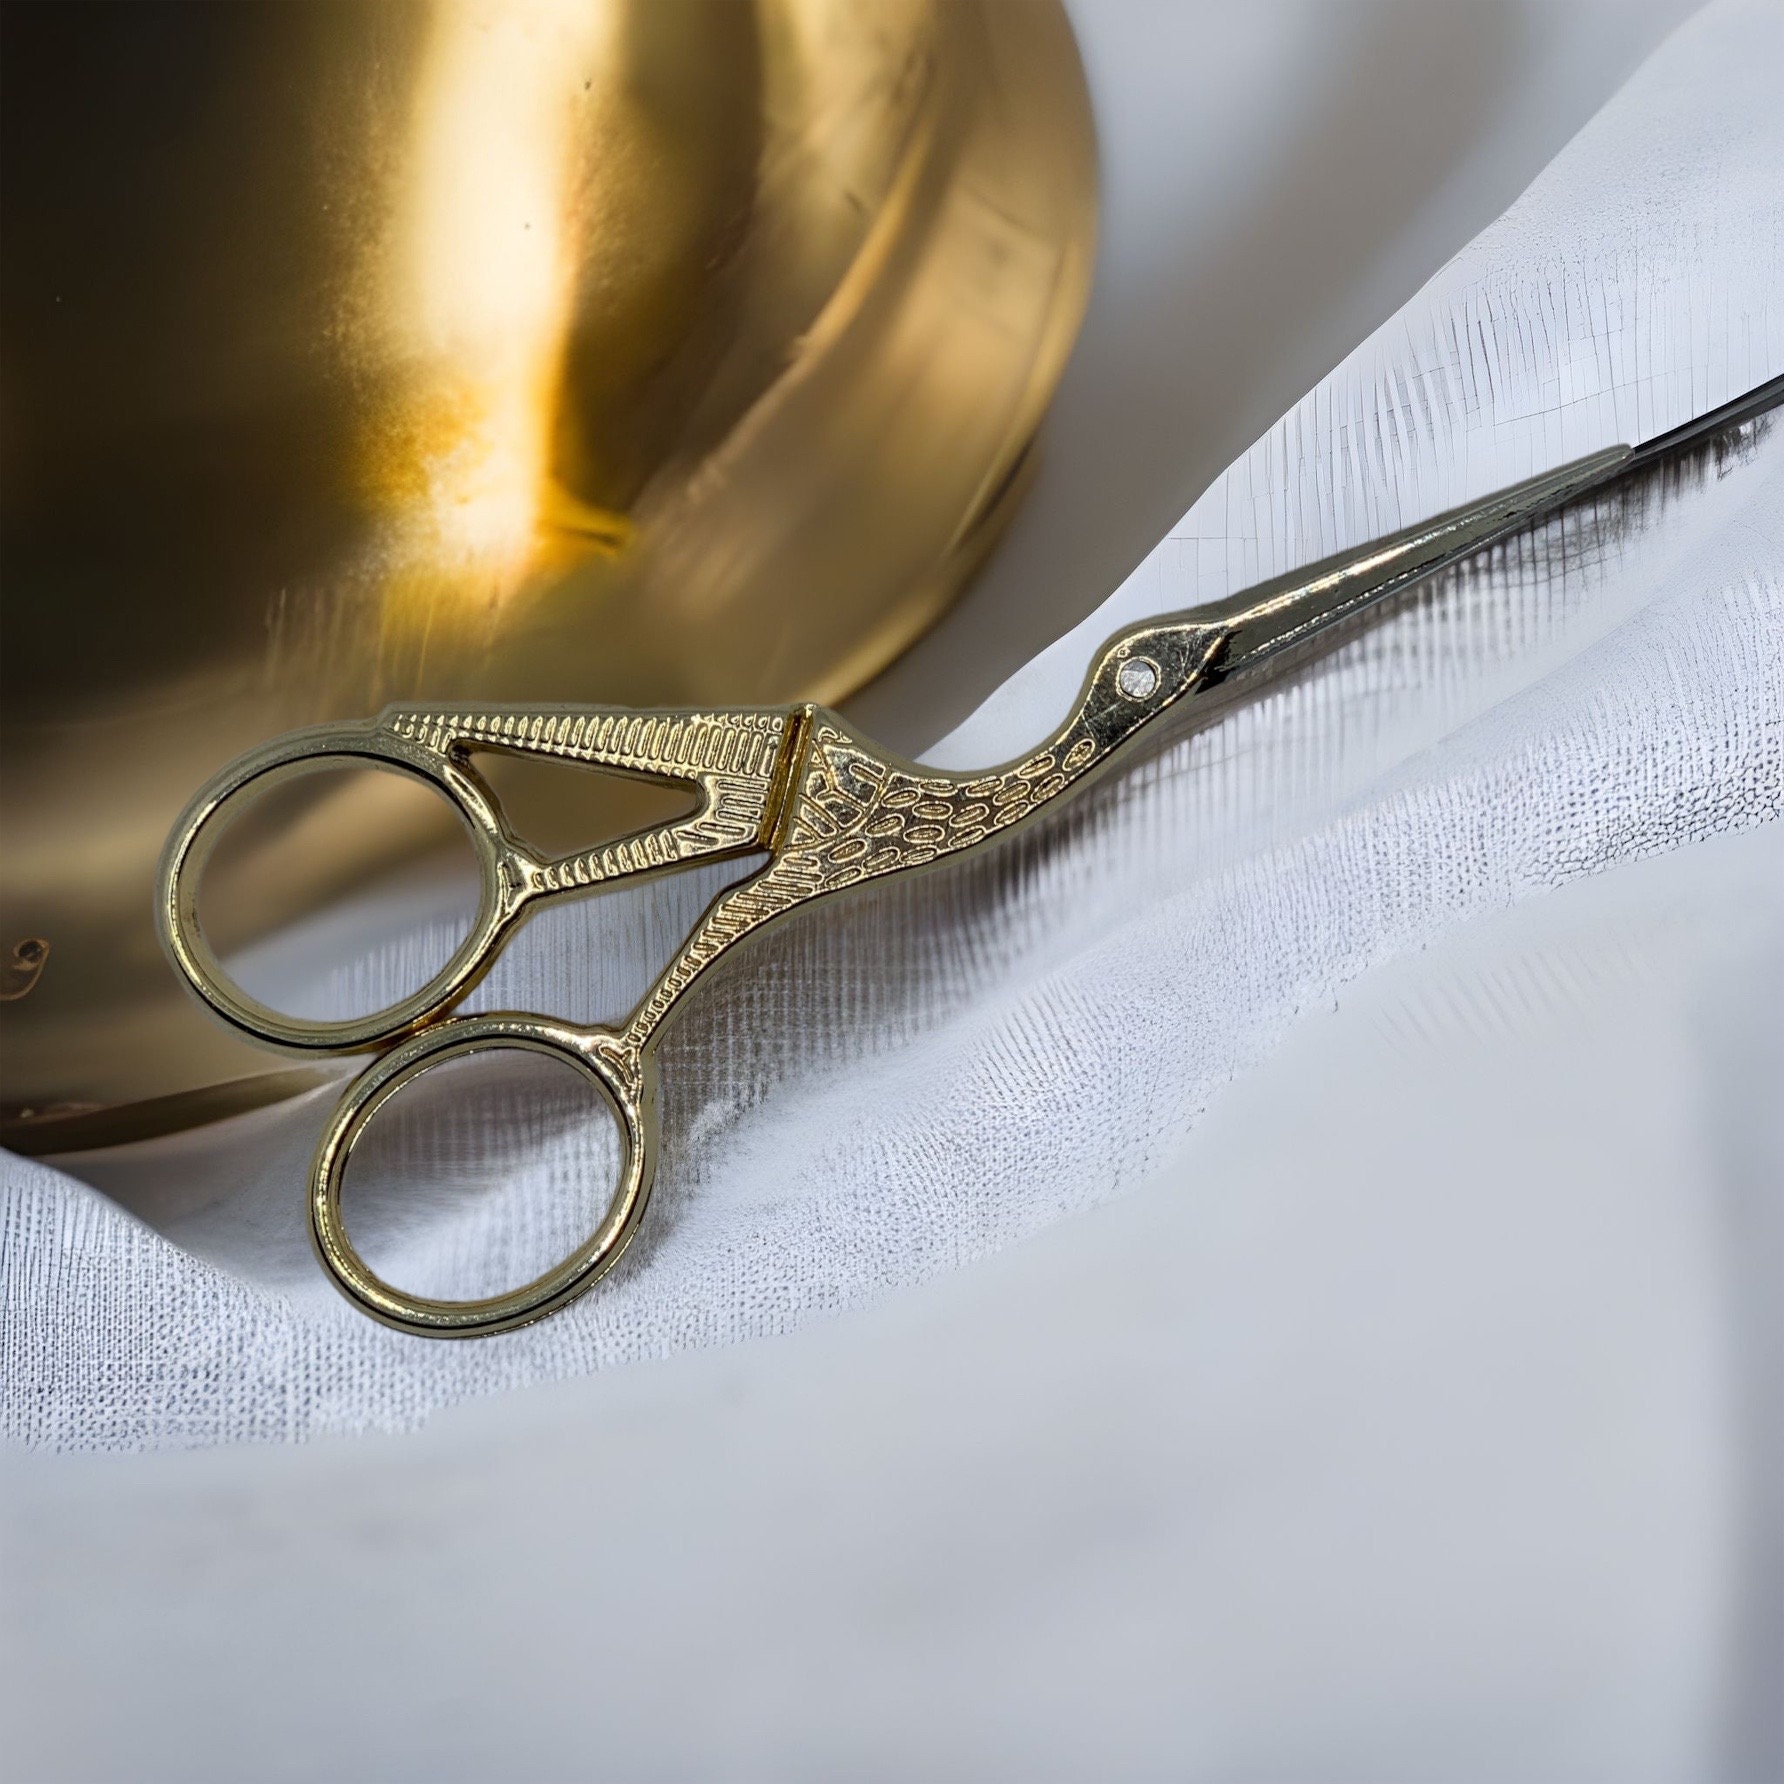 Stainless Steel Gold Crane/bird Scissors for Embroidery and Sewing